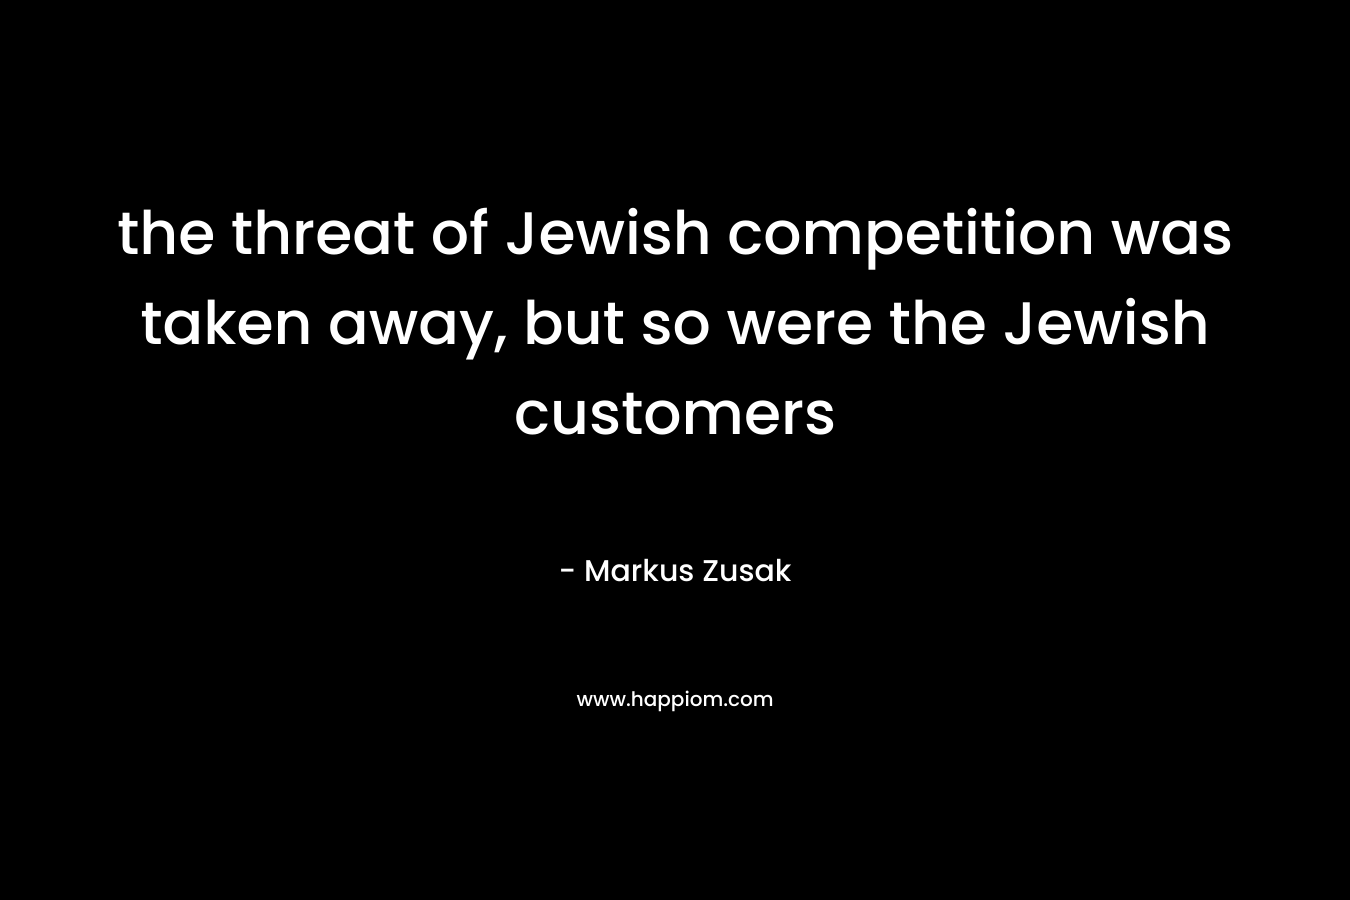 the threat of Jewish competition was taken away, but so were the Jewish customers